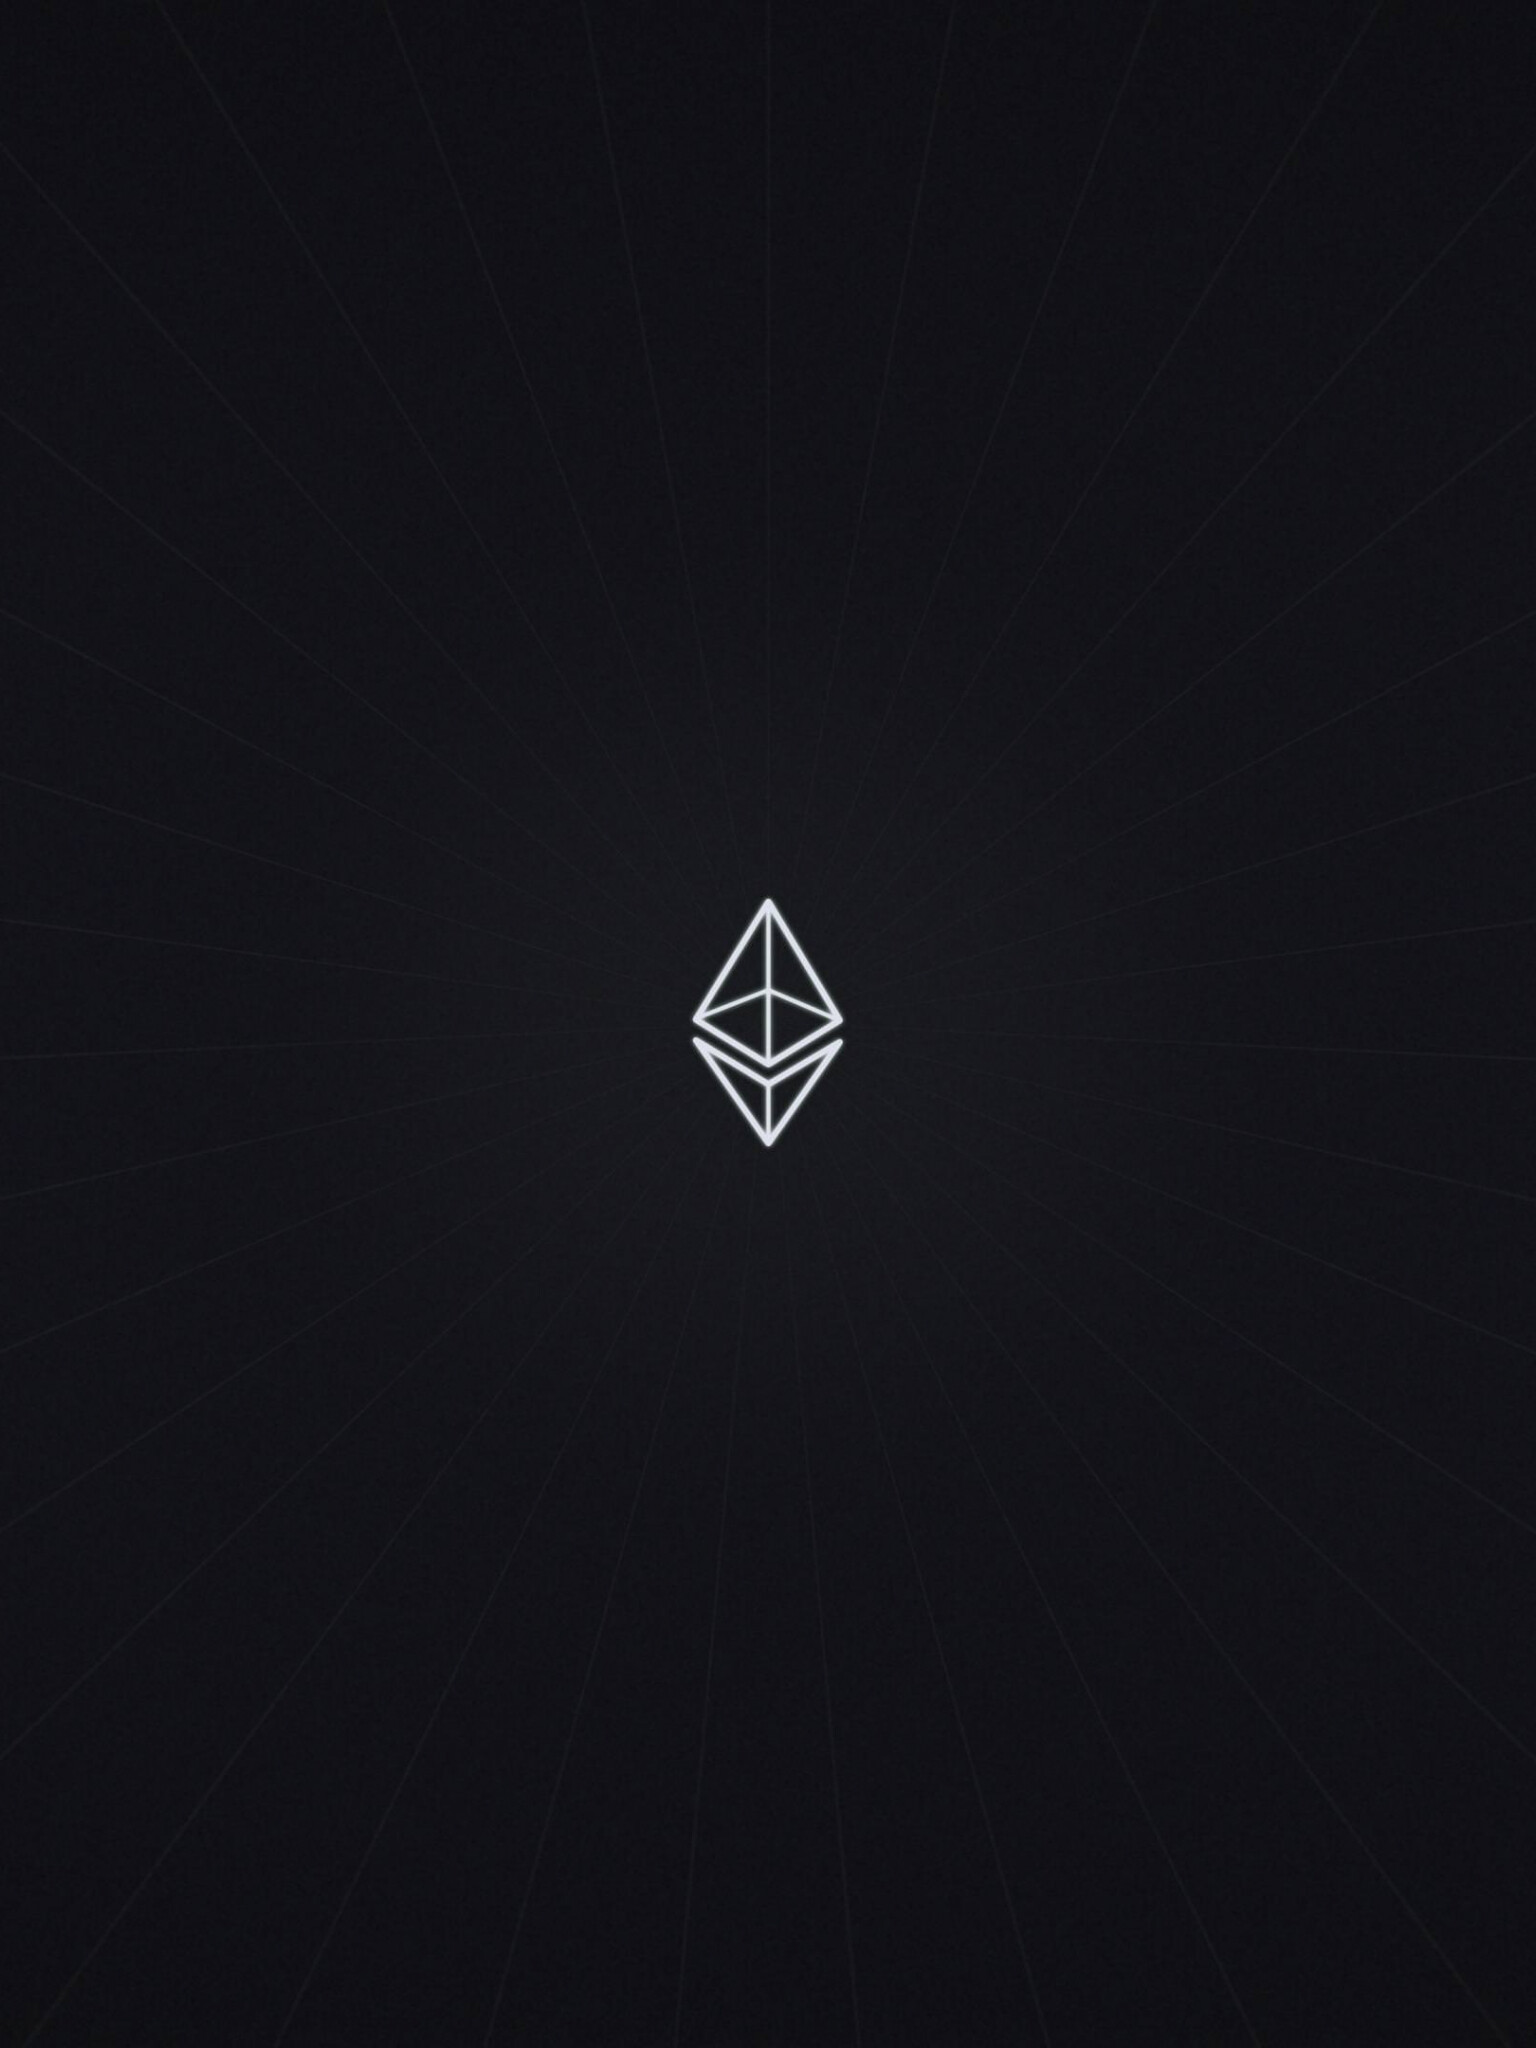 Cryptocurrency: Ethereum, A medium of exchange that exists exclusively online. 1540x2050 HD Wallpaper.